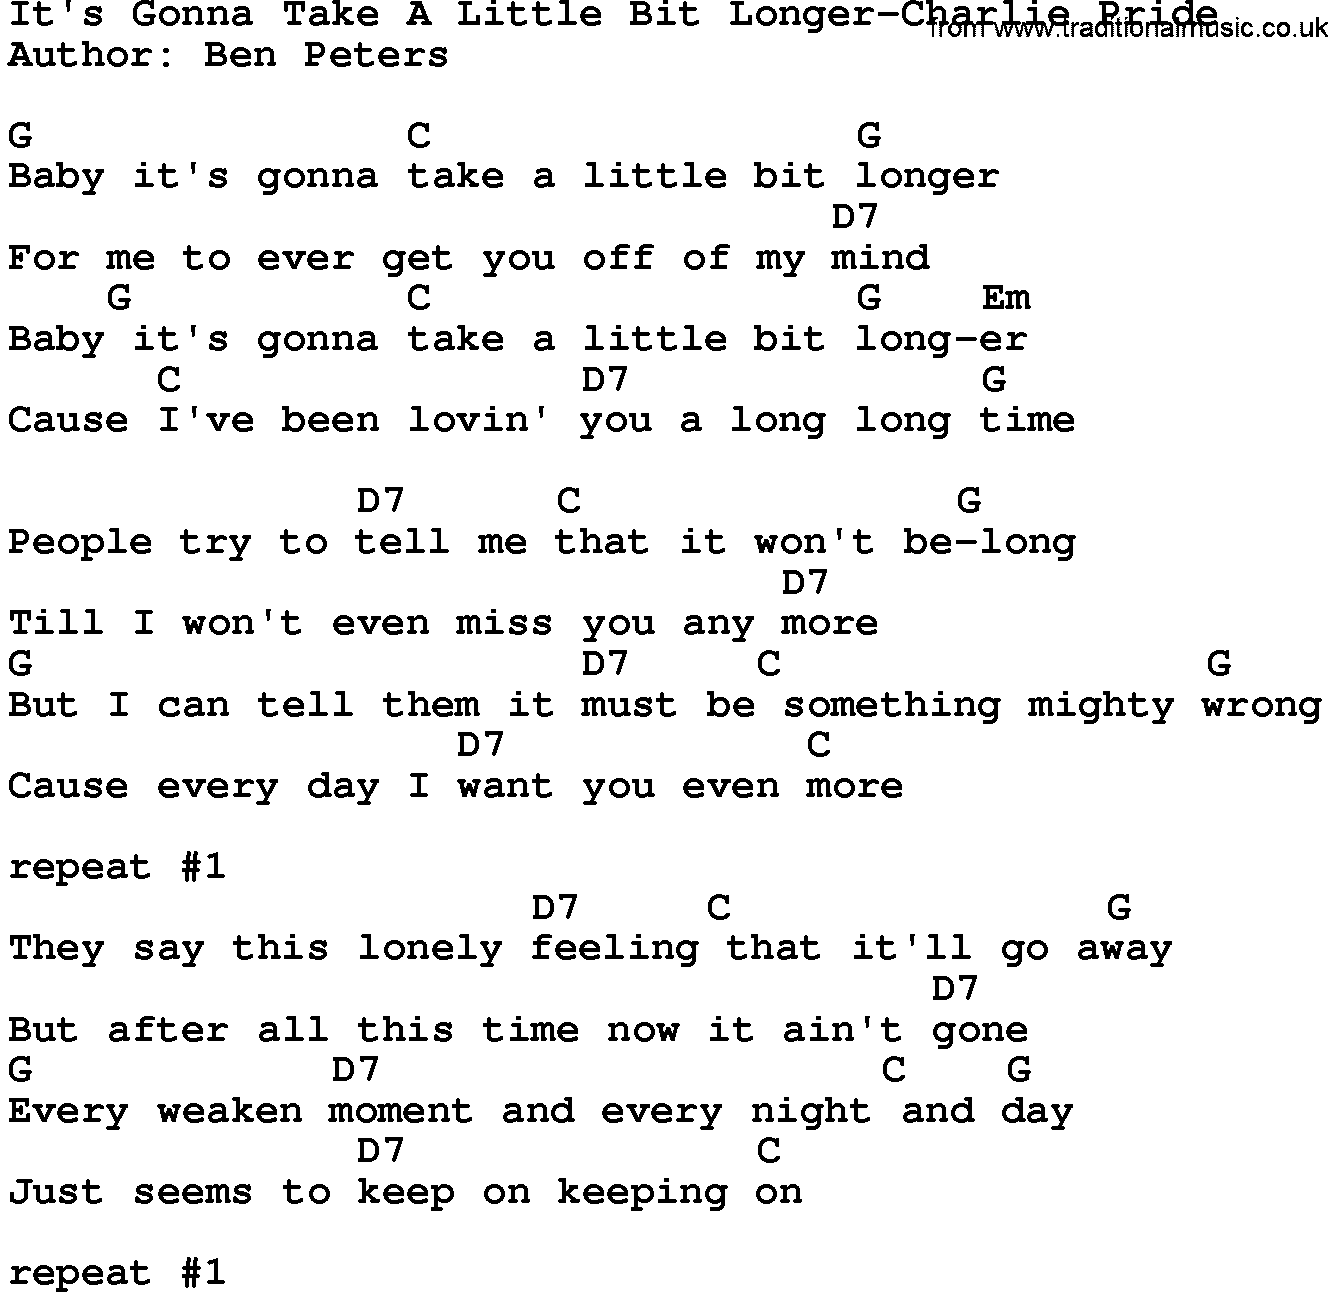 Country music song: It's Gonna Take A Little Bit Longer-Charlie Pride lyrics and chords